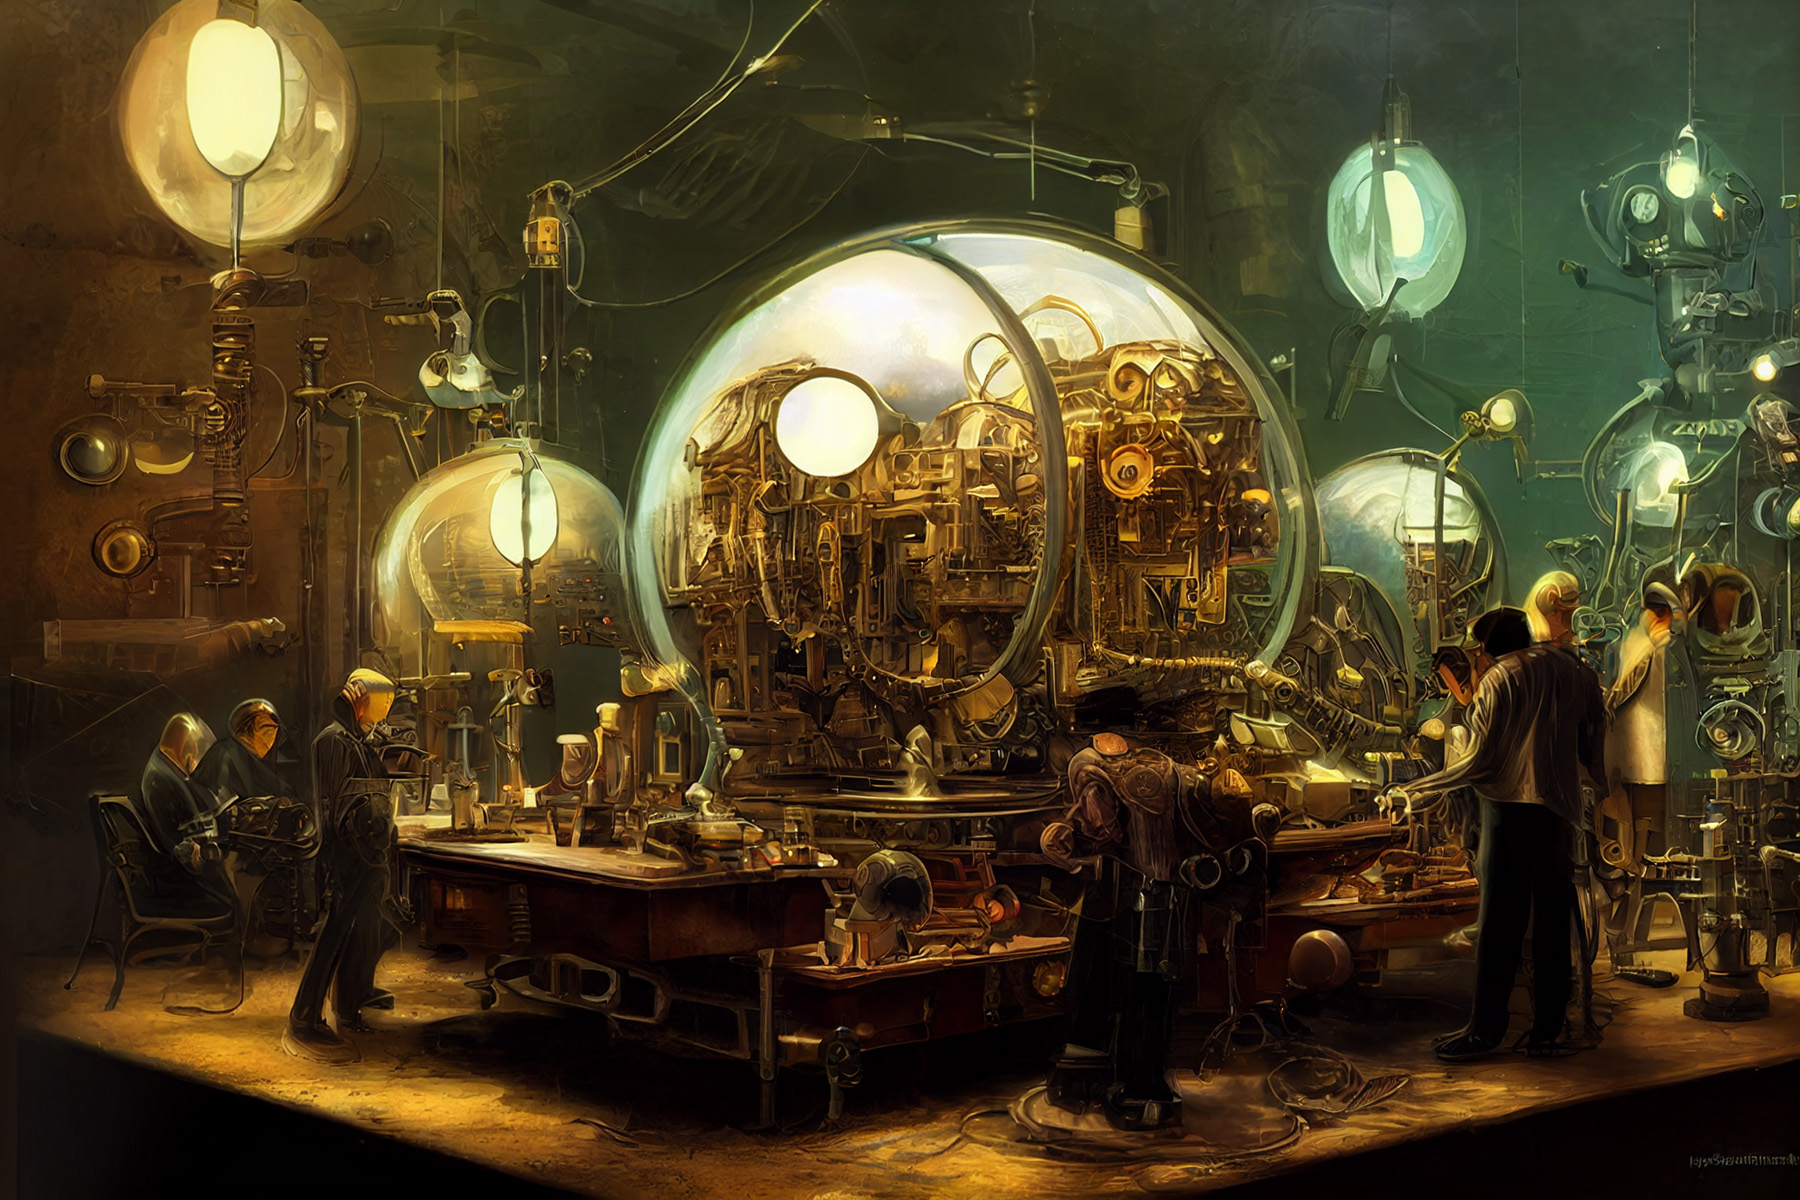 Ban The story of Gaïa : GAÏA is an amazing civilization that incorporates retro futuristic technology and aesthetics inspired by industrial steam-powered machinery. It is a world between an alternative of the Victorian era, where steam power remains in mainstream use. Steampunk